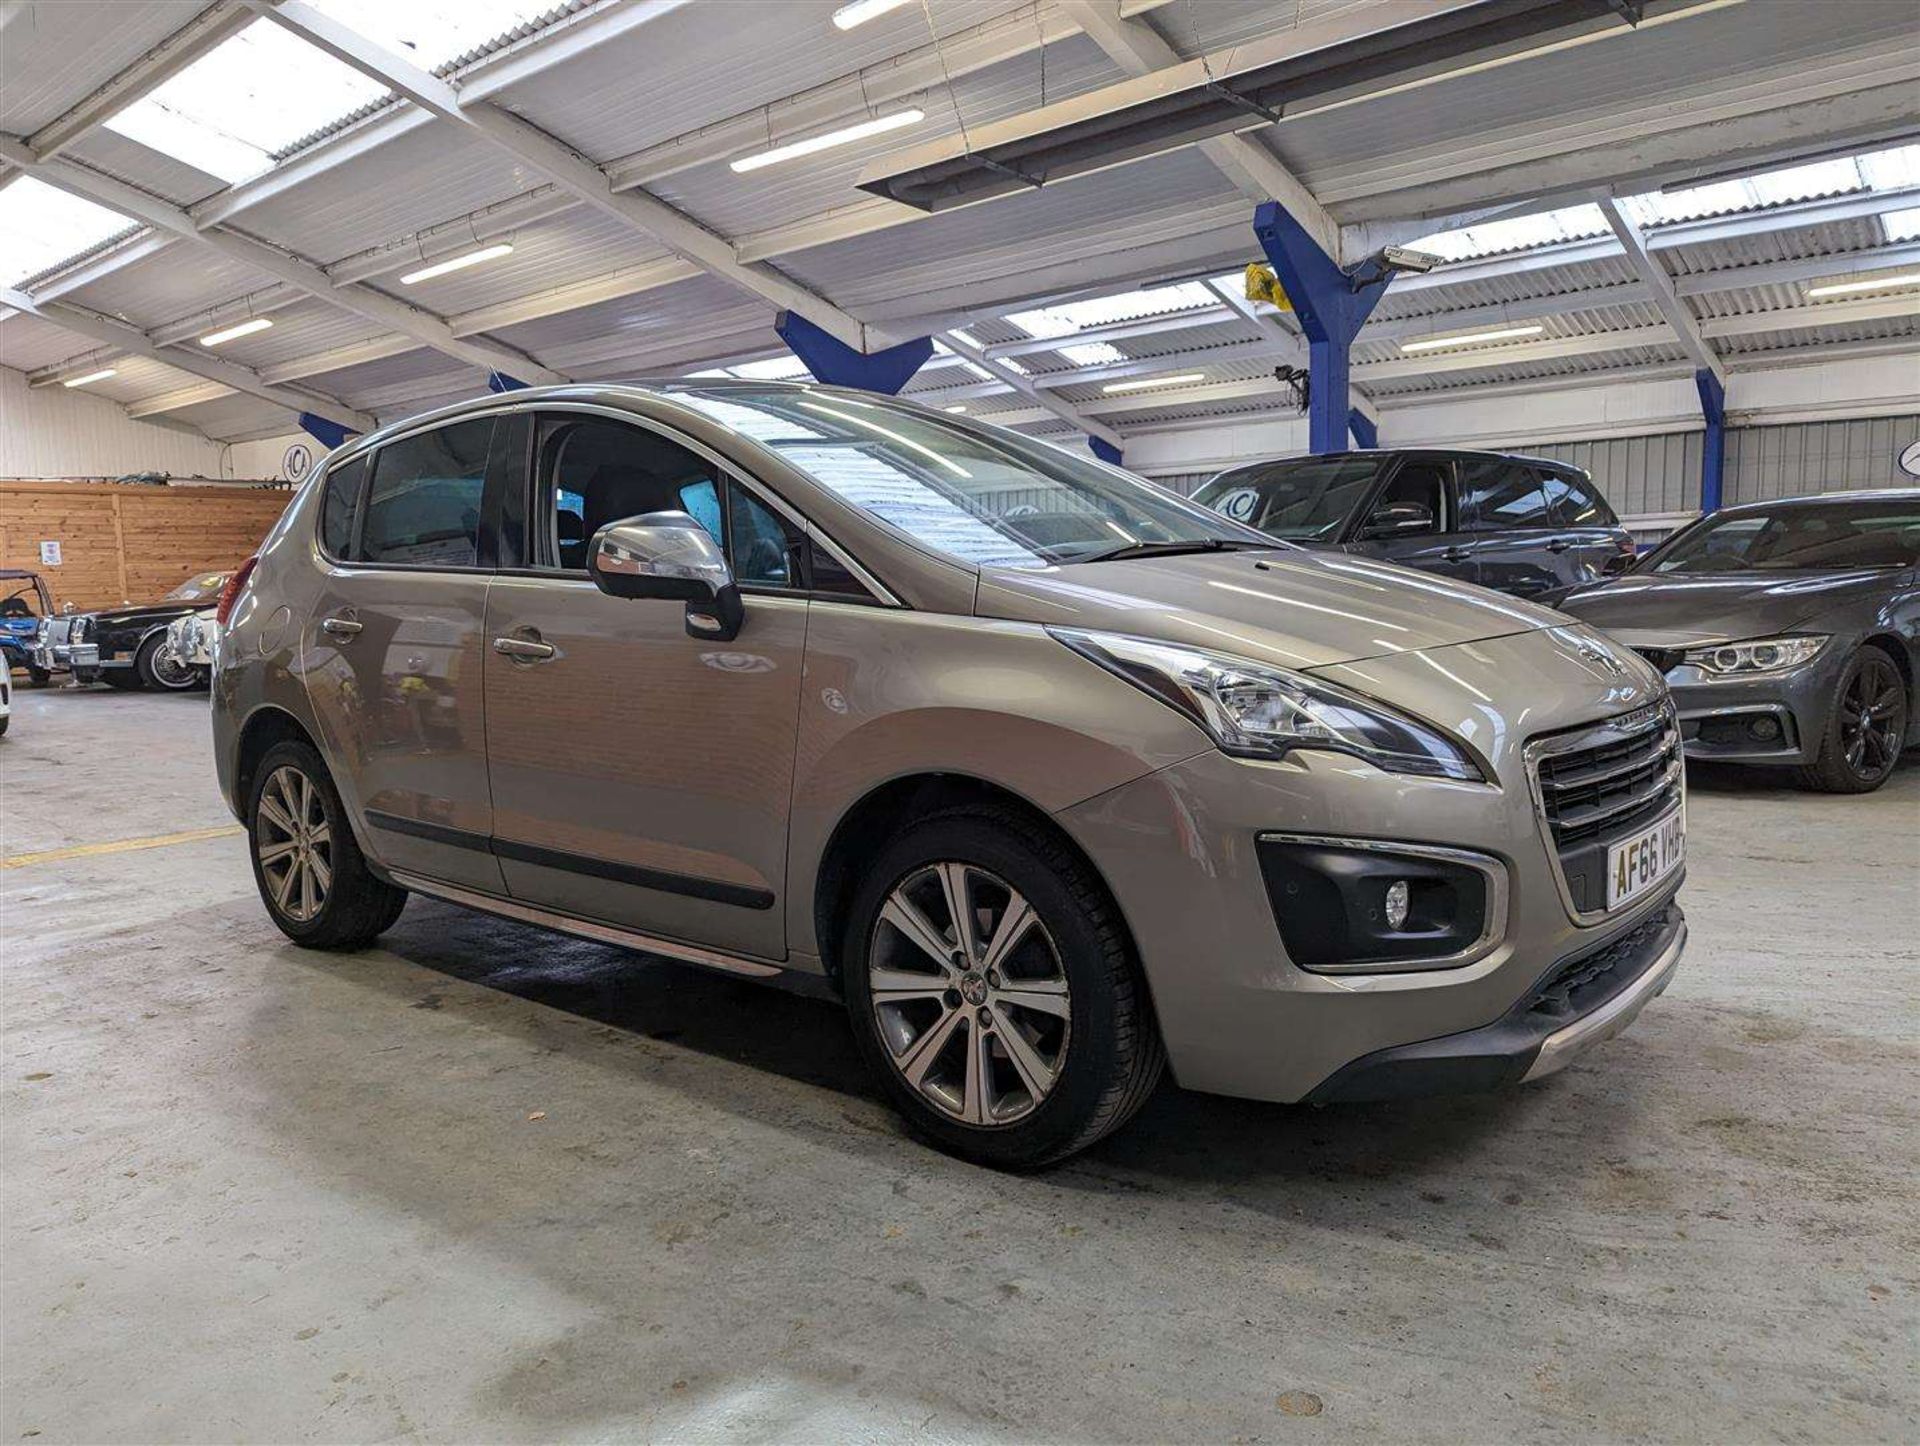 2016 PEUGEOT 3008 ALLURE BLUE HDI S/S - Image 11 of 27